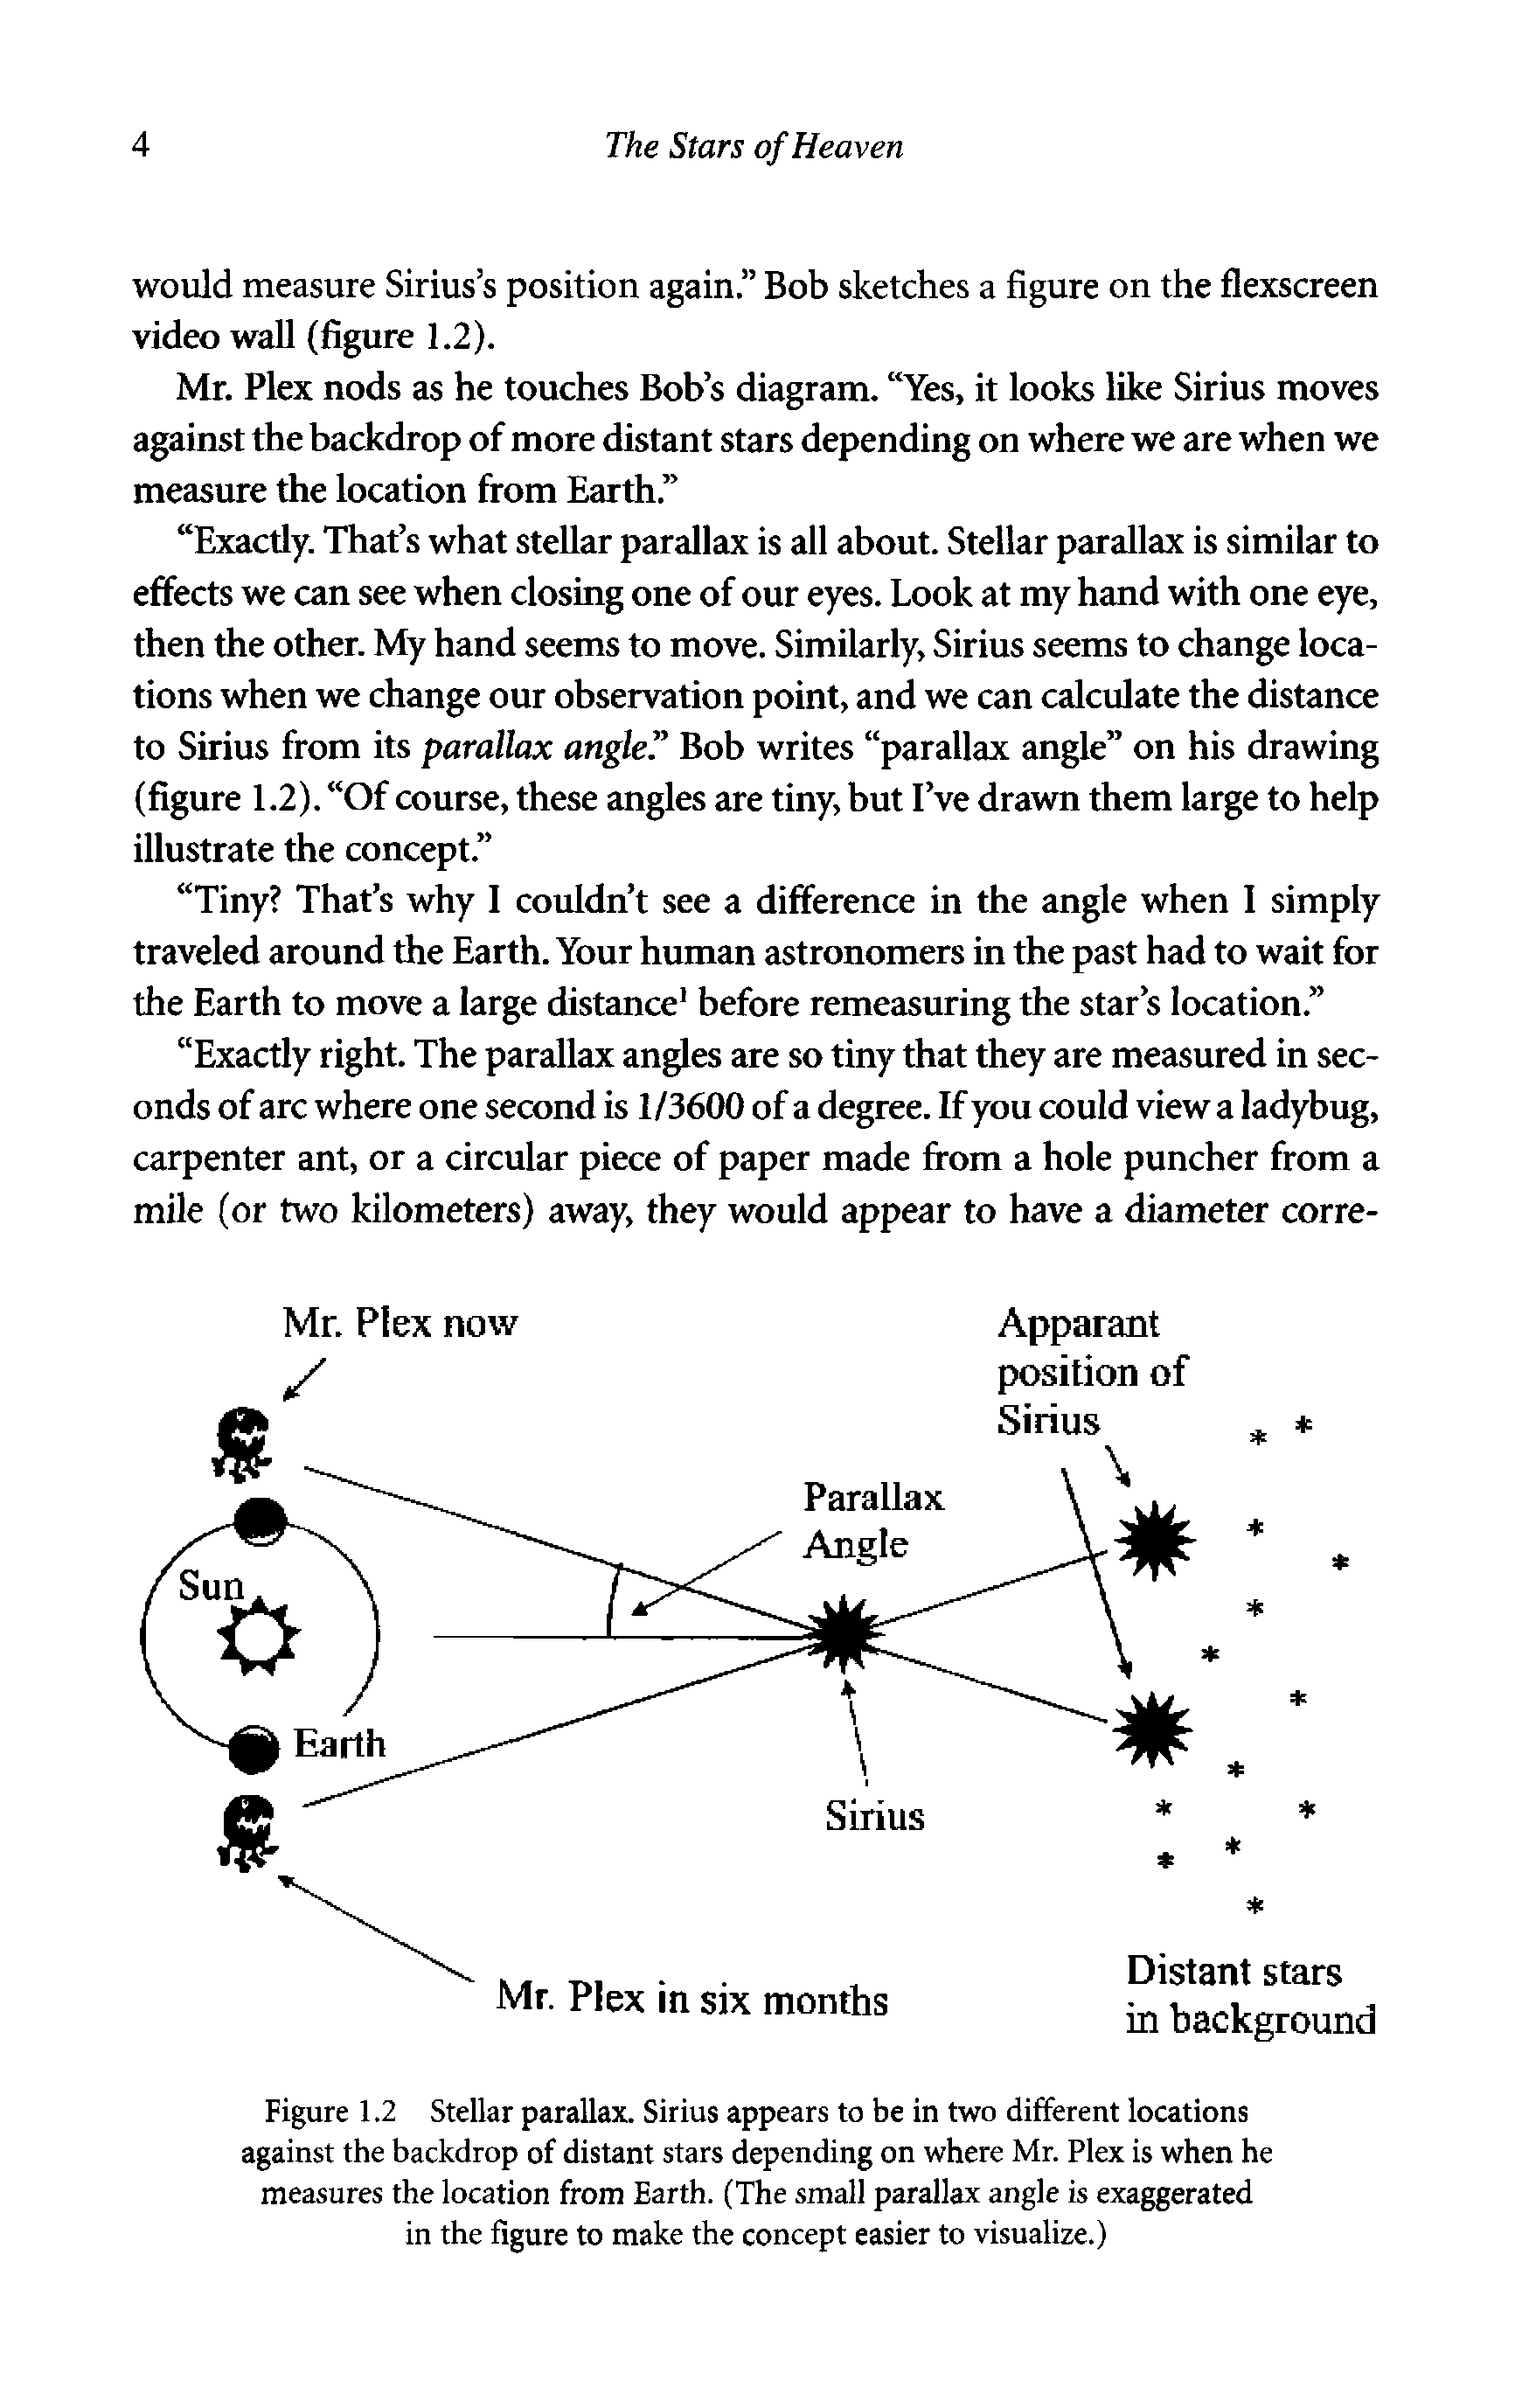 Figure 1.2 Stellar parallax. Sirius appears to be in two different locations against the backdrop of distant stars depending on where Mr. Plex is when he measures the location from Earth. (The small parallax angle is exaggerated in the figure to make the concept easier to visualize.)...